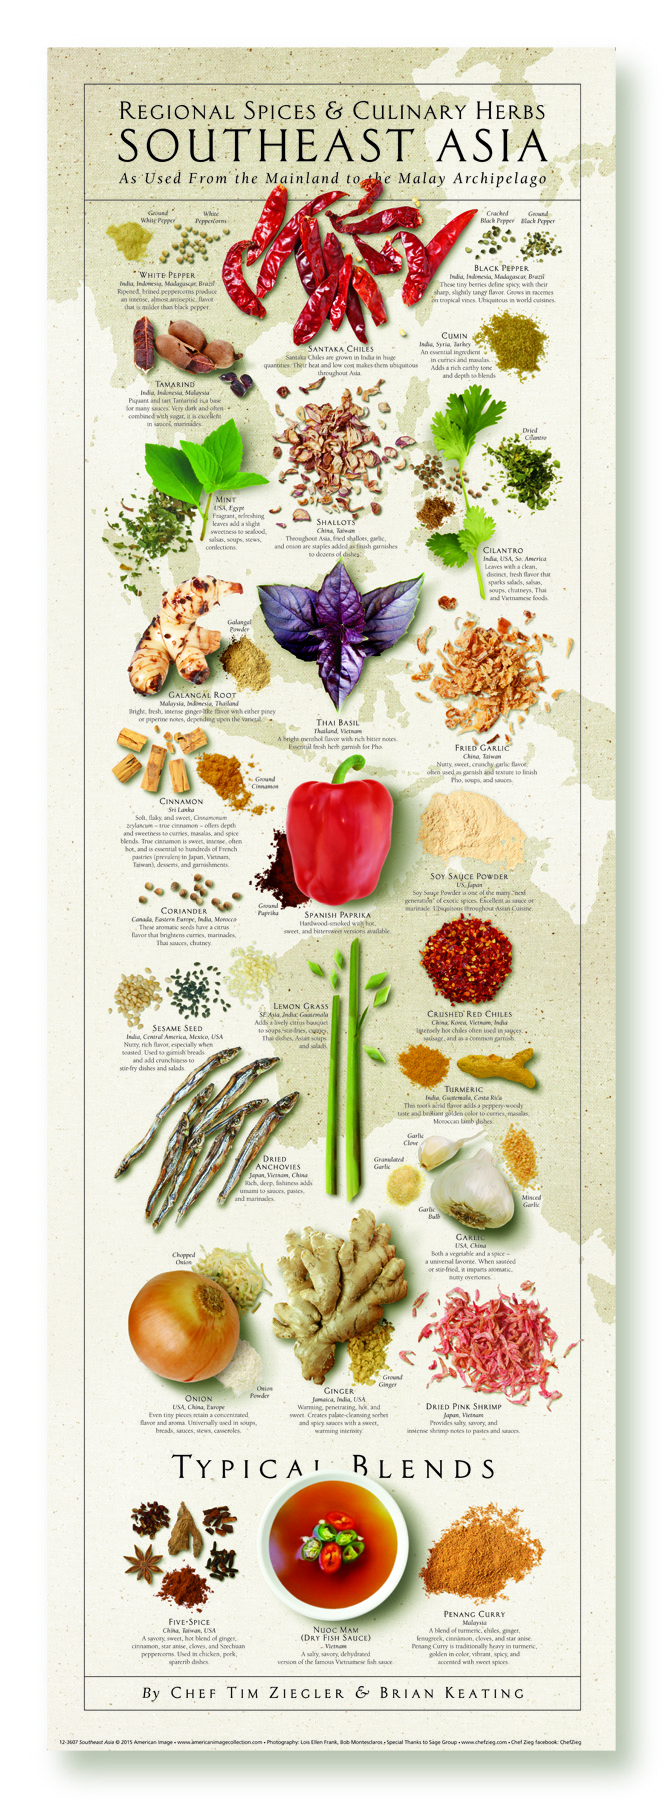 Southeast Asia Regional Spices & Culinary Herbs Print